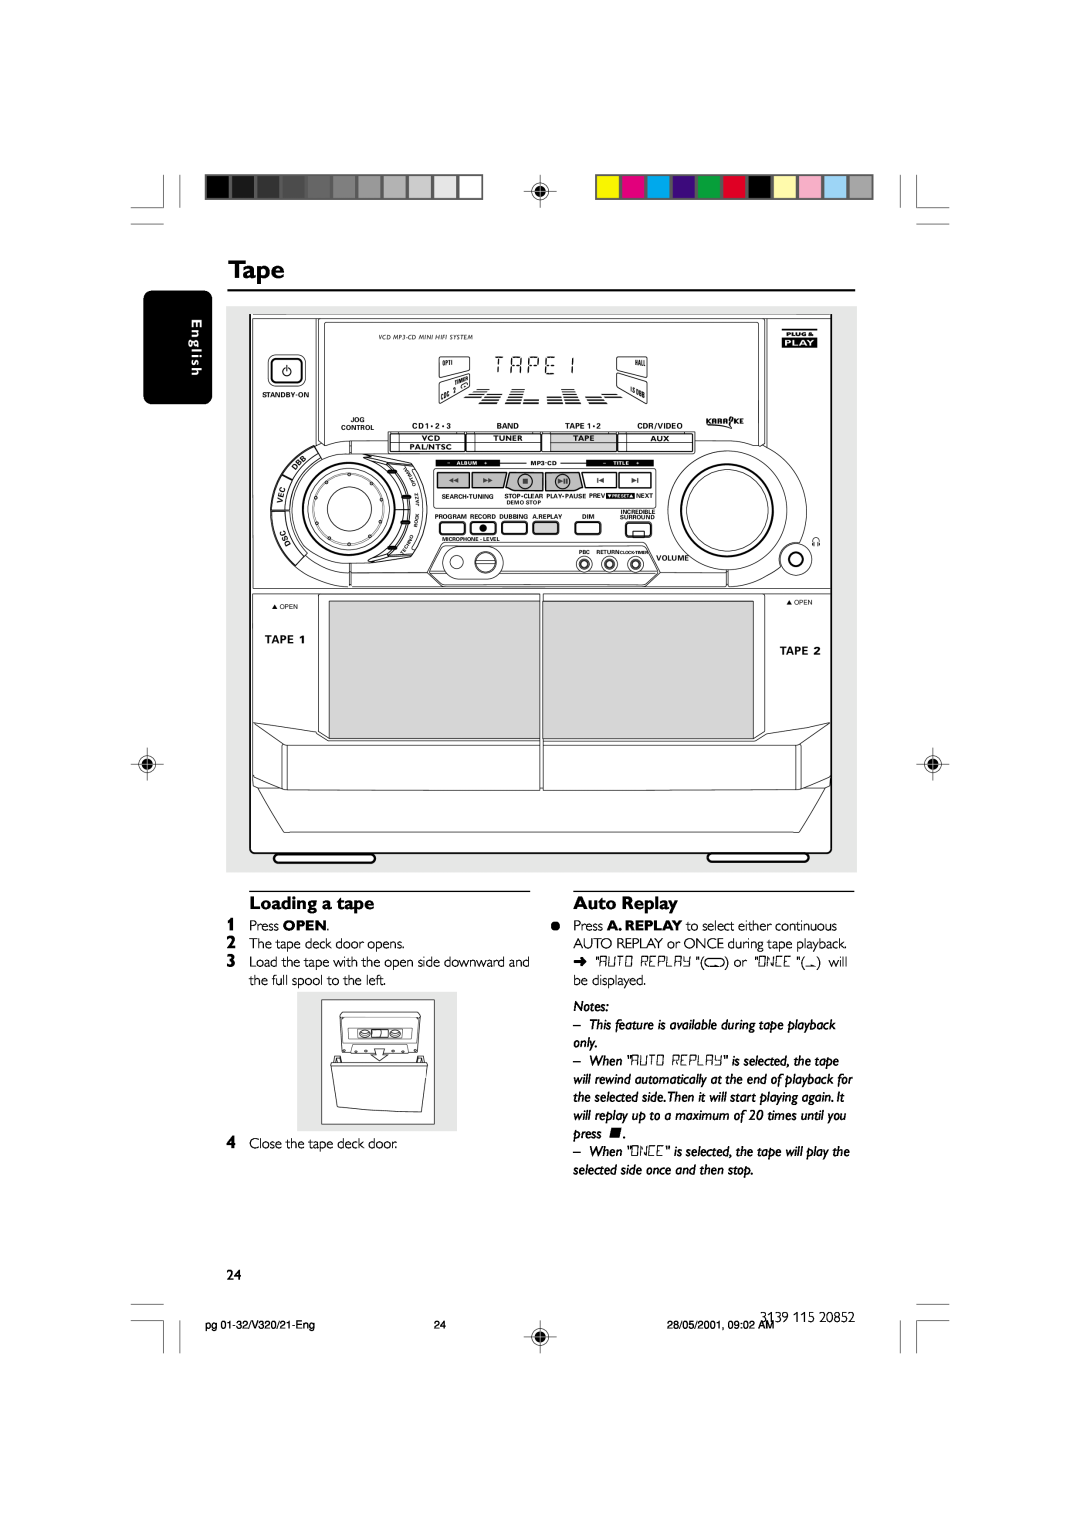 Philips FW-V320/21 manual Tape, Loading a tape, Auto Replay, ¶ Press A. REPLAY to select either continuous 